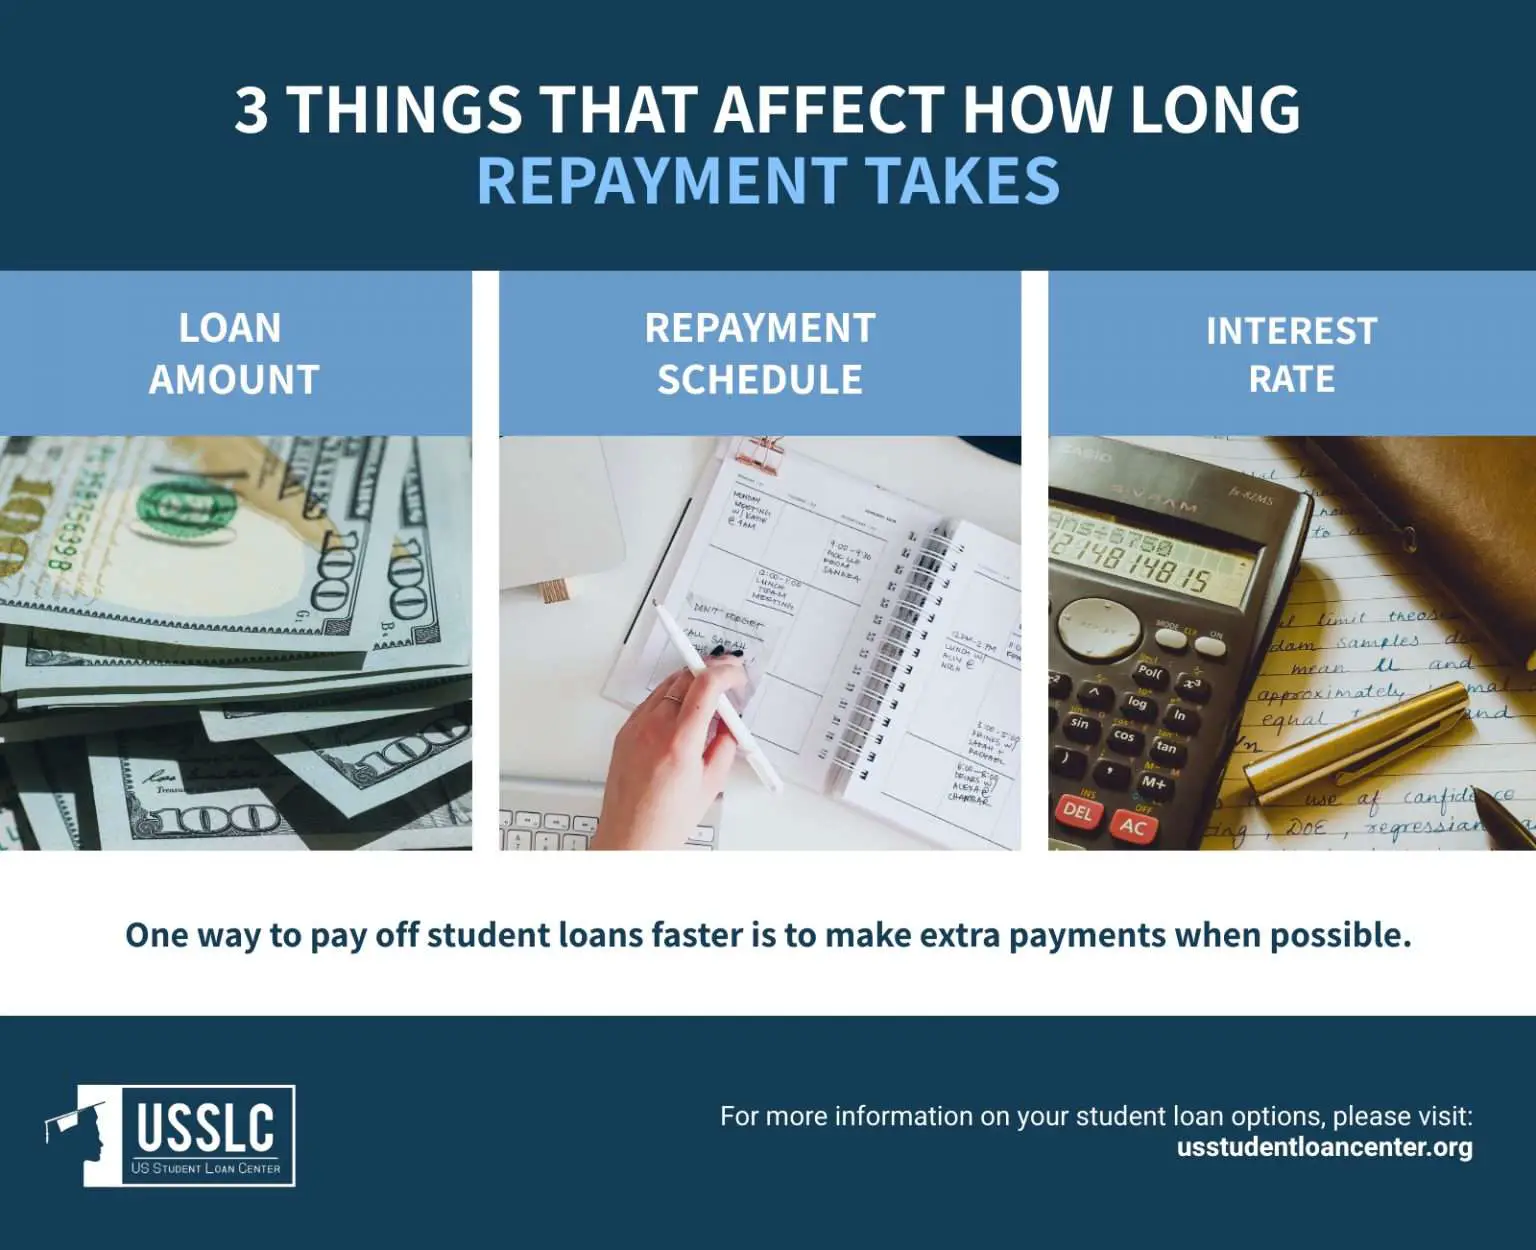 How Long Does It Take to Pay Off Student Loans?